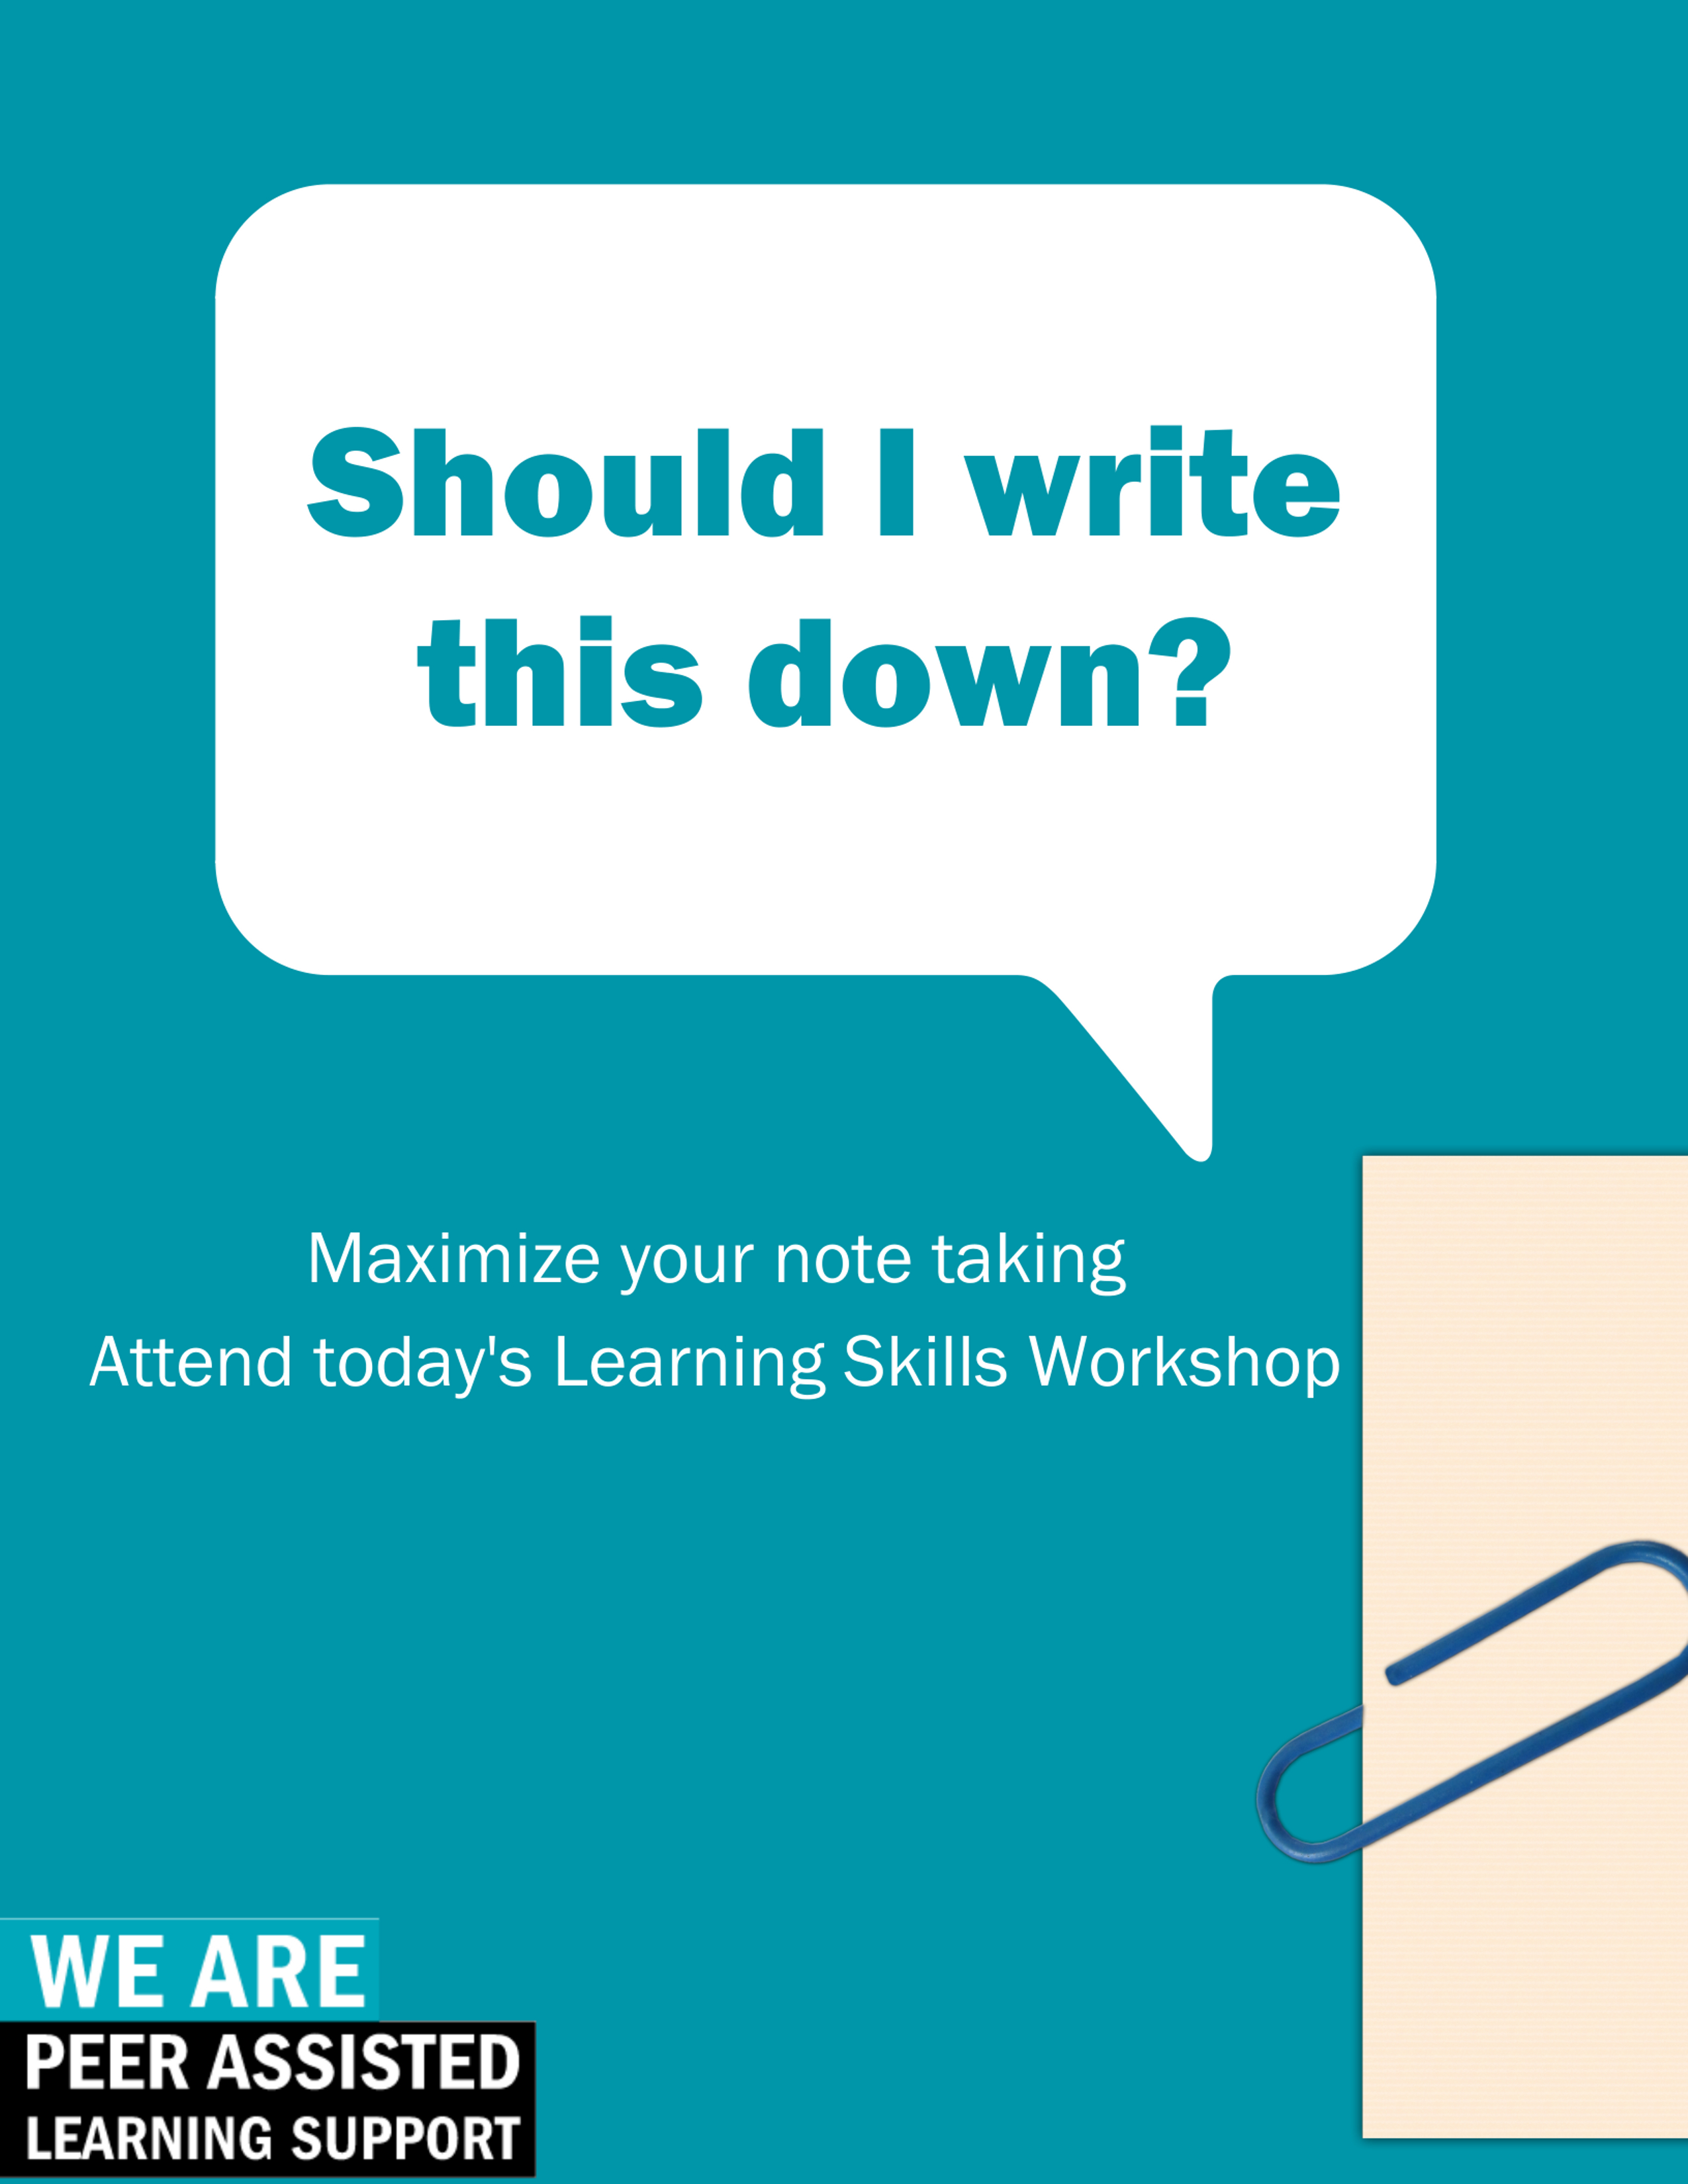 Should I write this down? Attend this workshop to learn about note taking skills